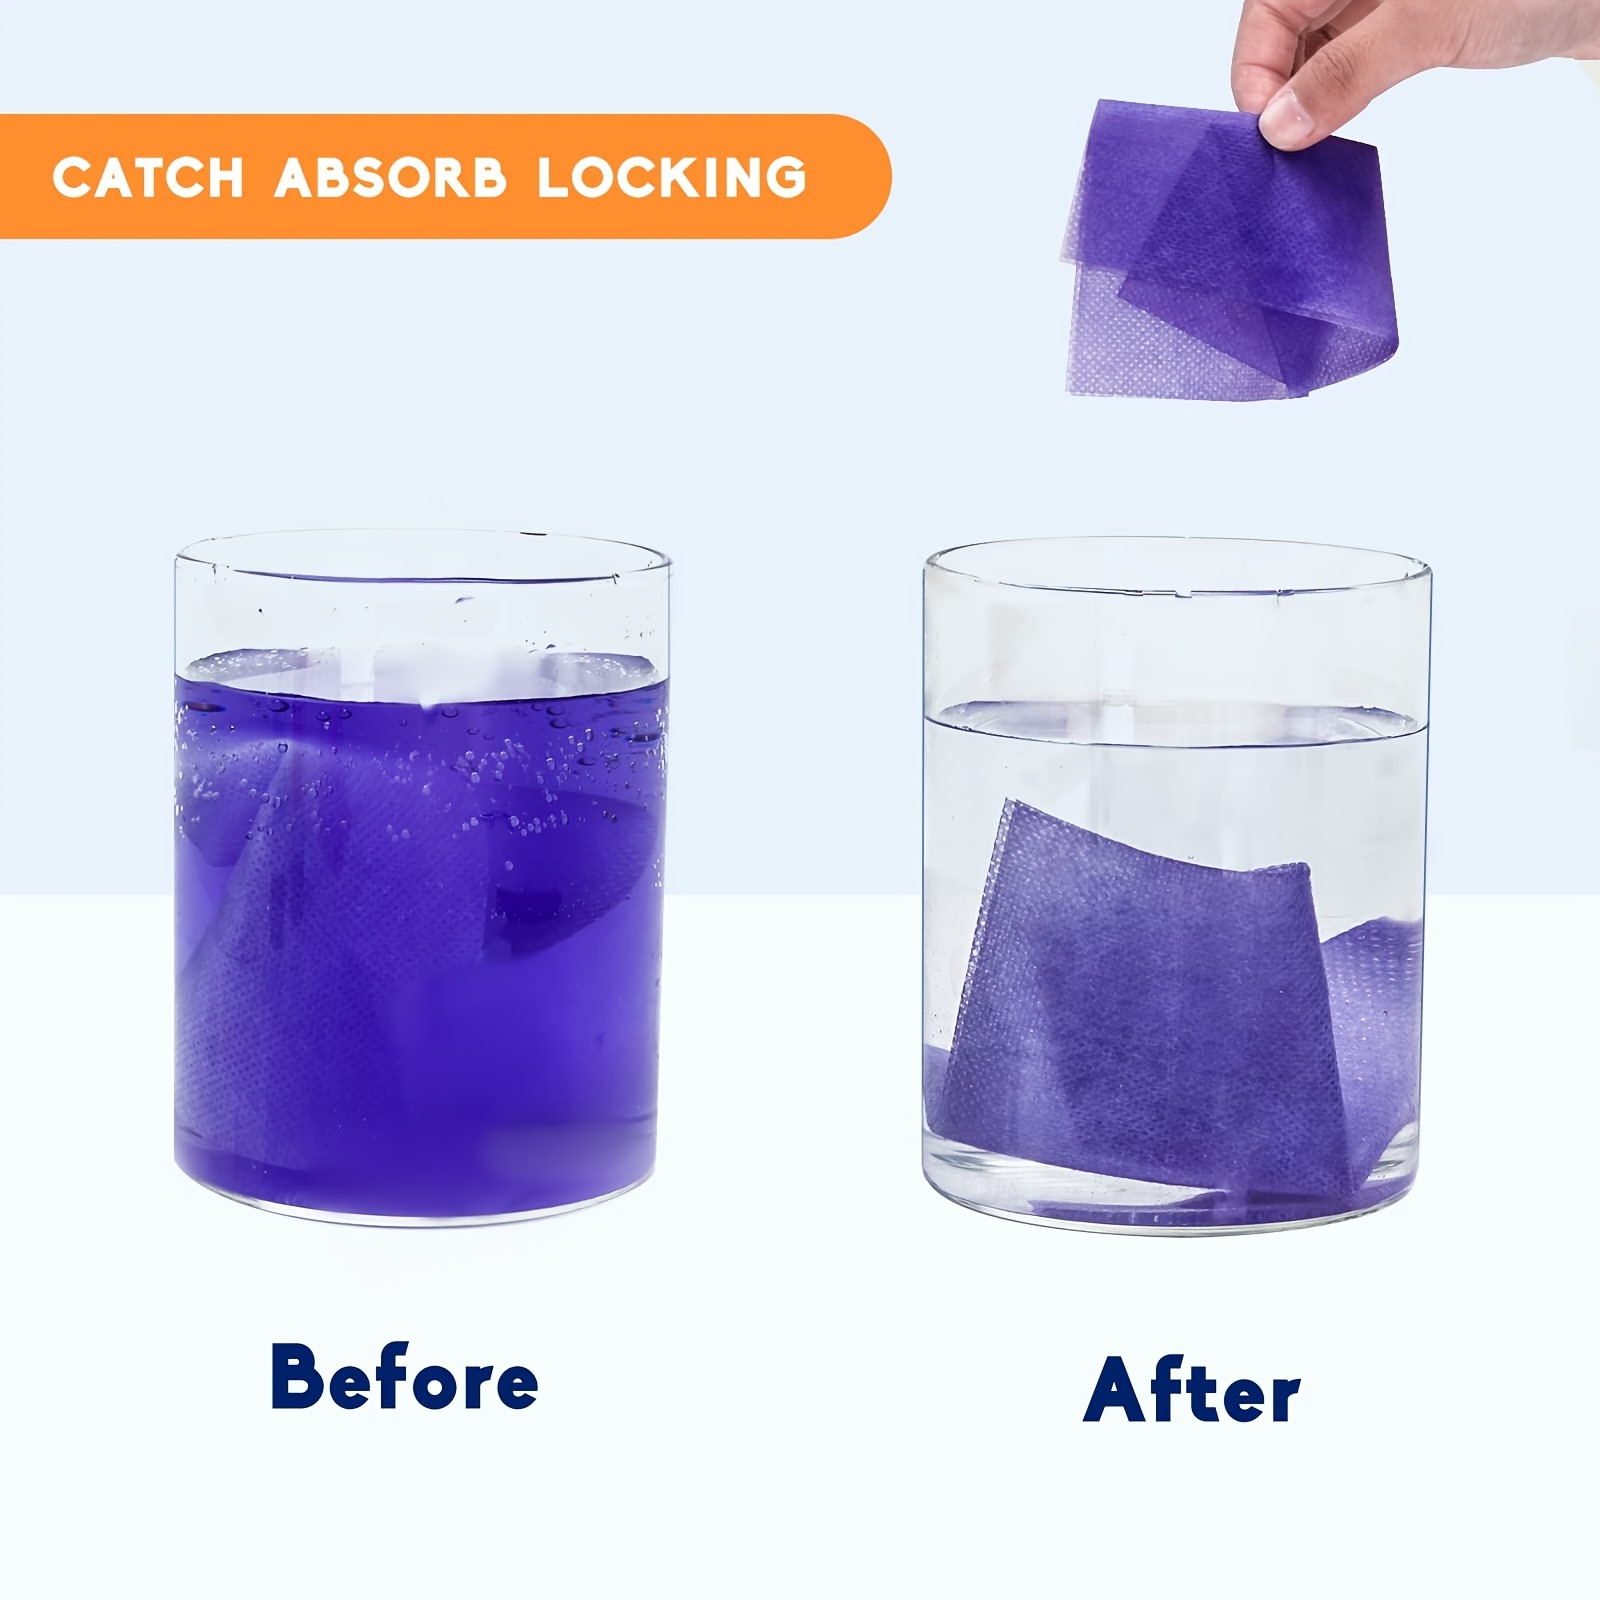 A color catcher claims to absorb dye in the wash. We tested to see